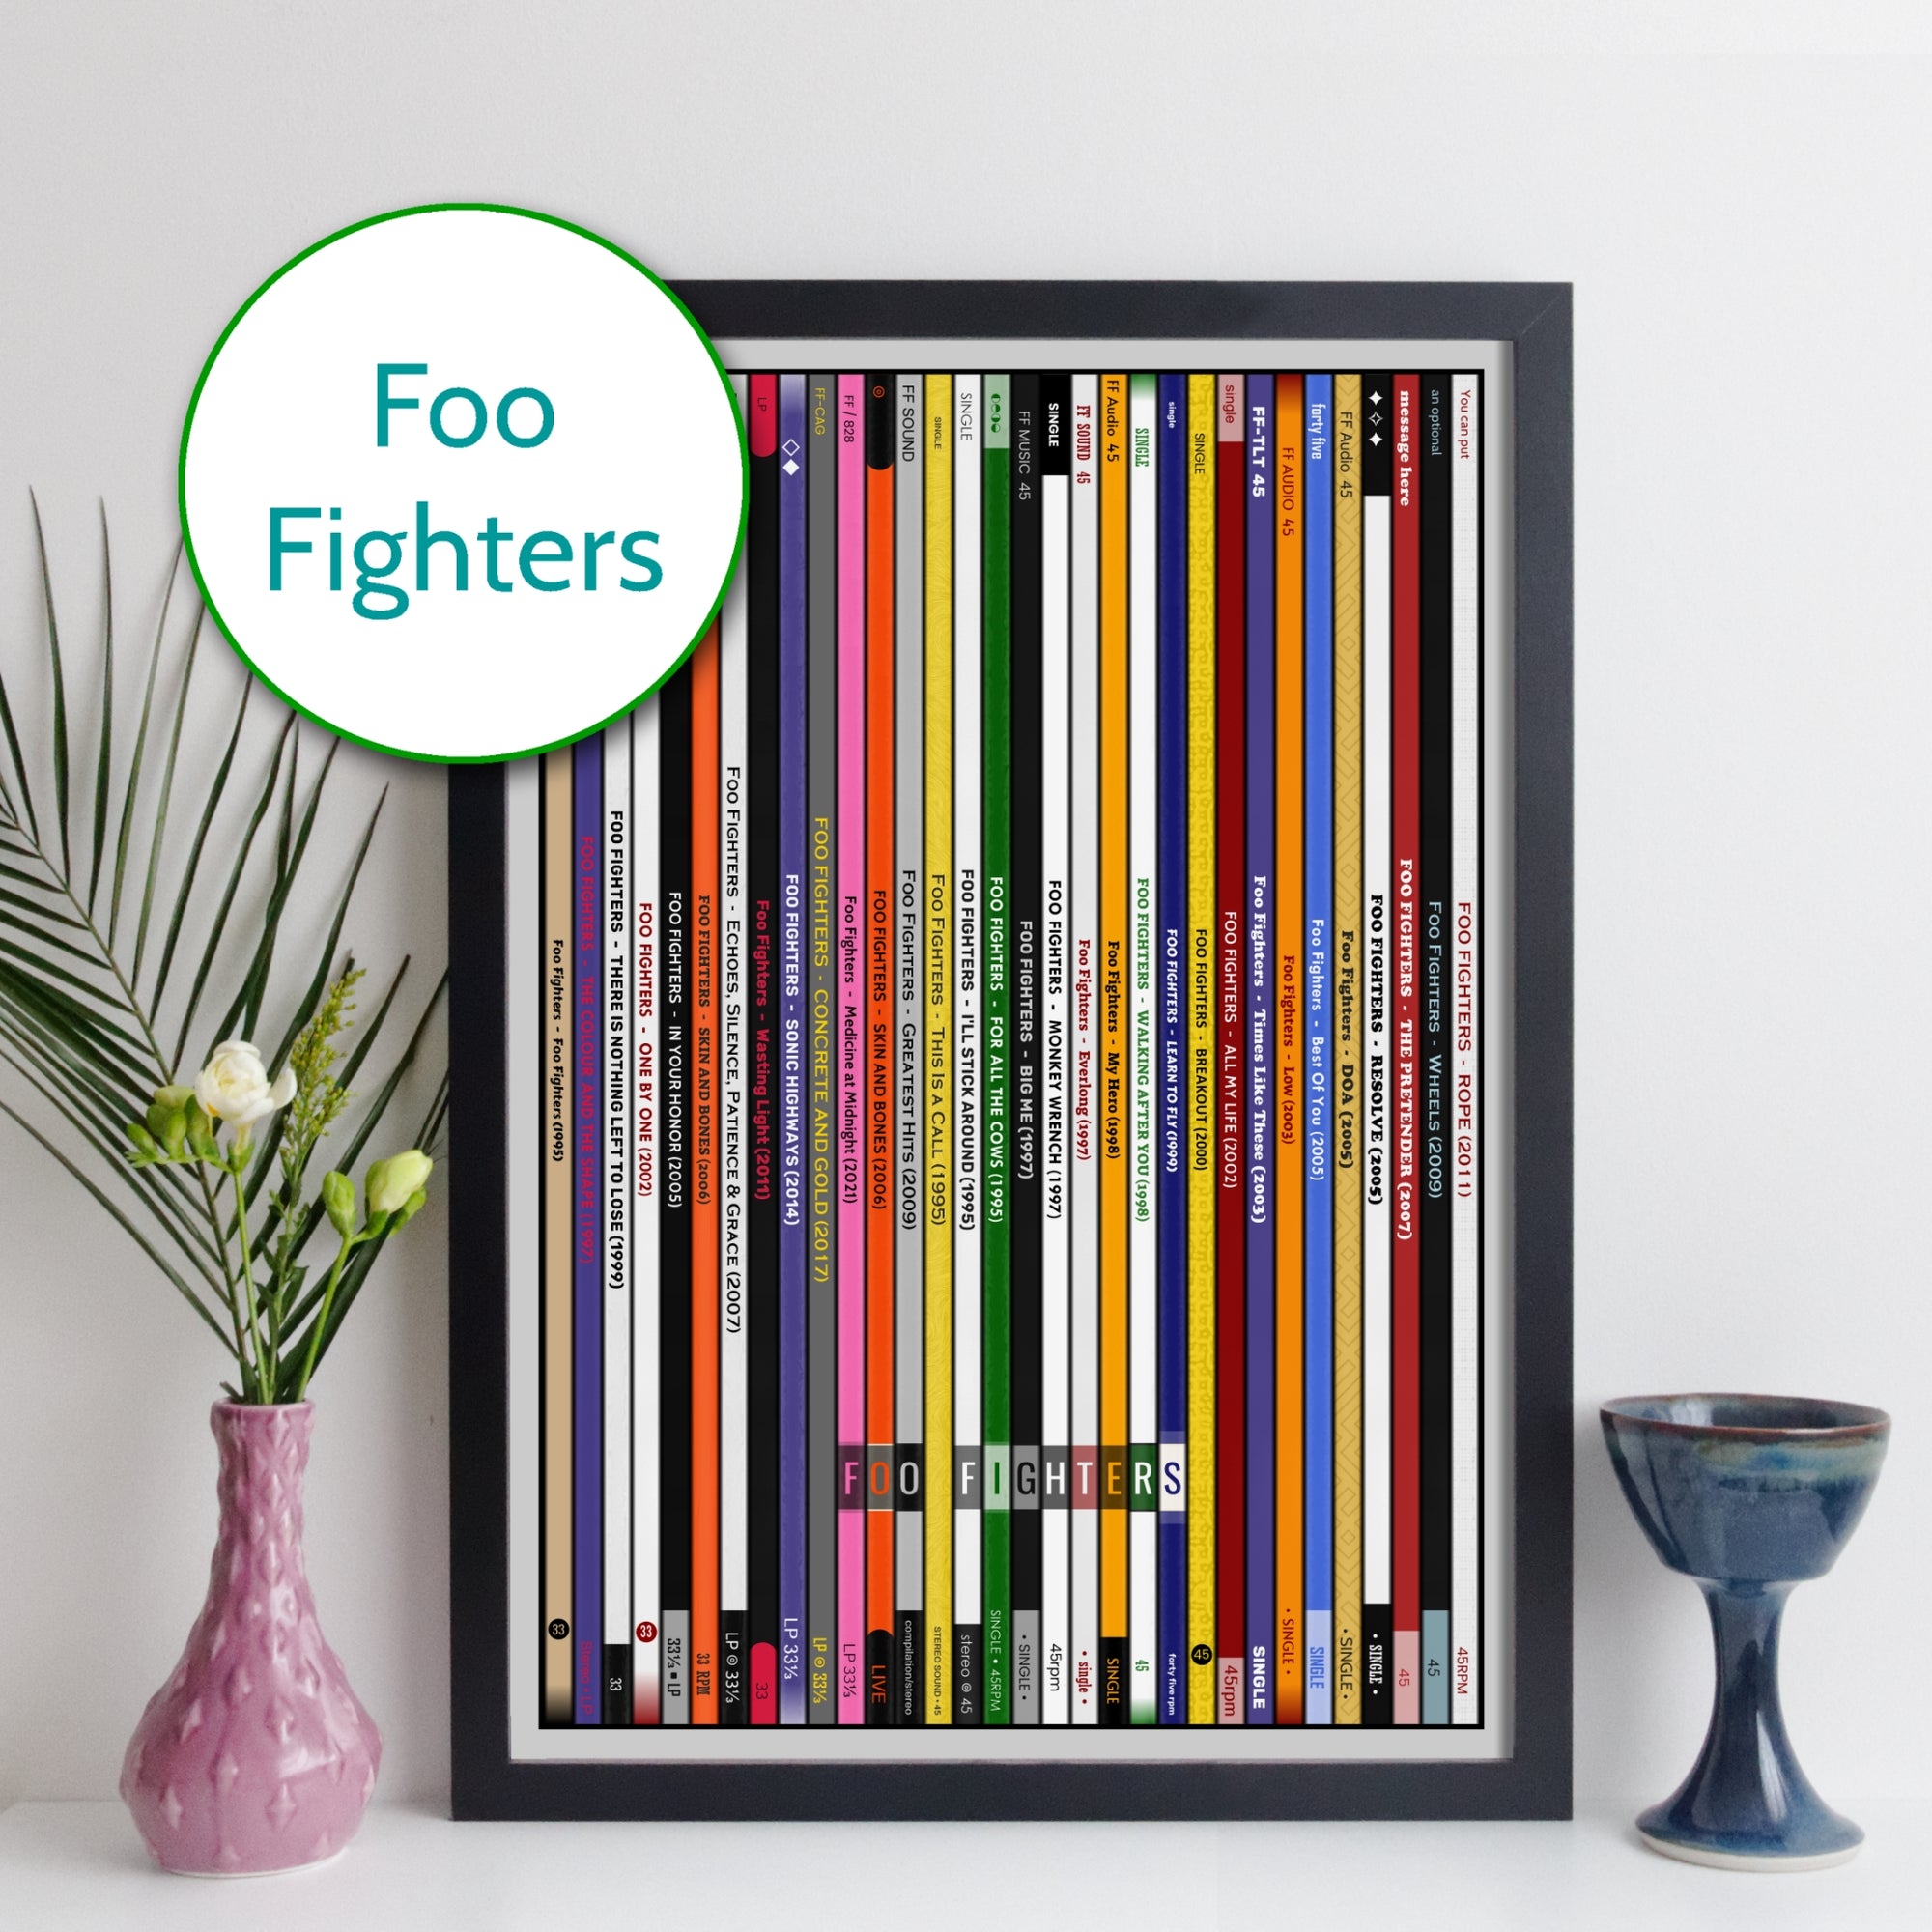 Foo Fighters Discography Print